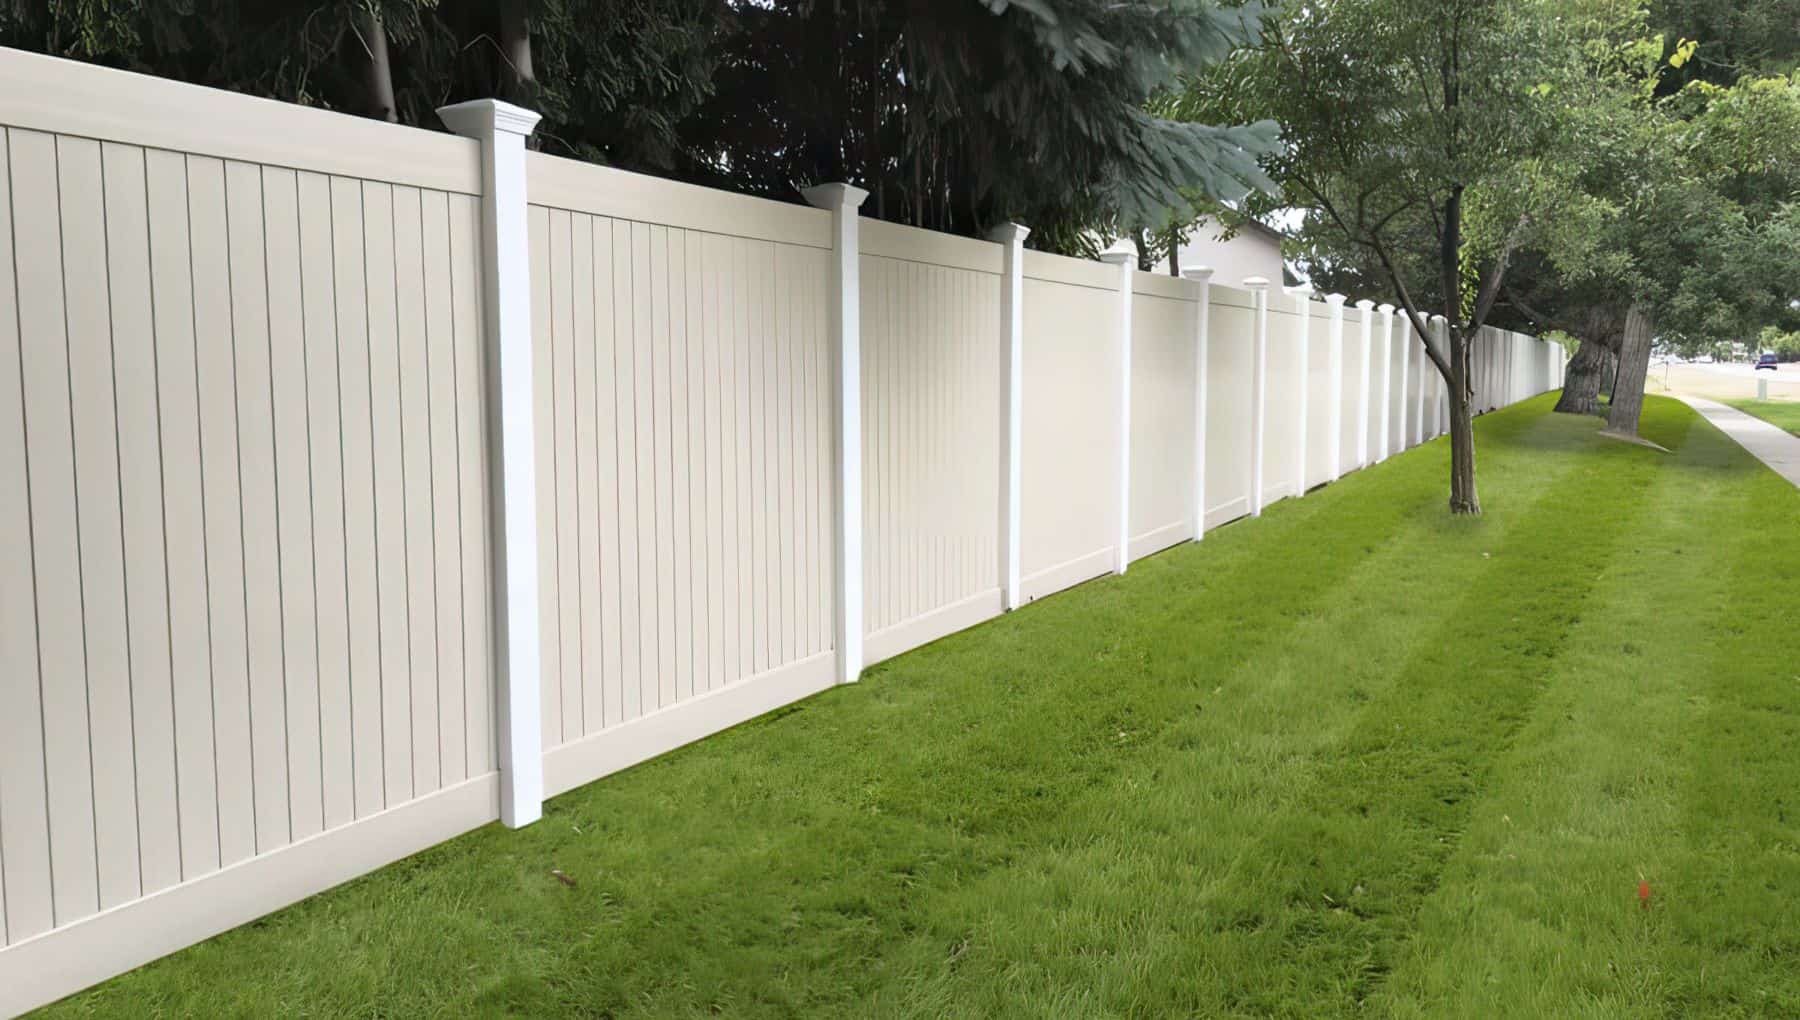 Tan vinyl fence in front of small trees on a manicured grassy lawn with bigger trees in the background.